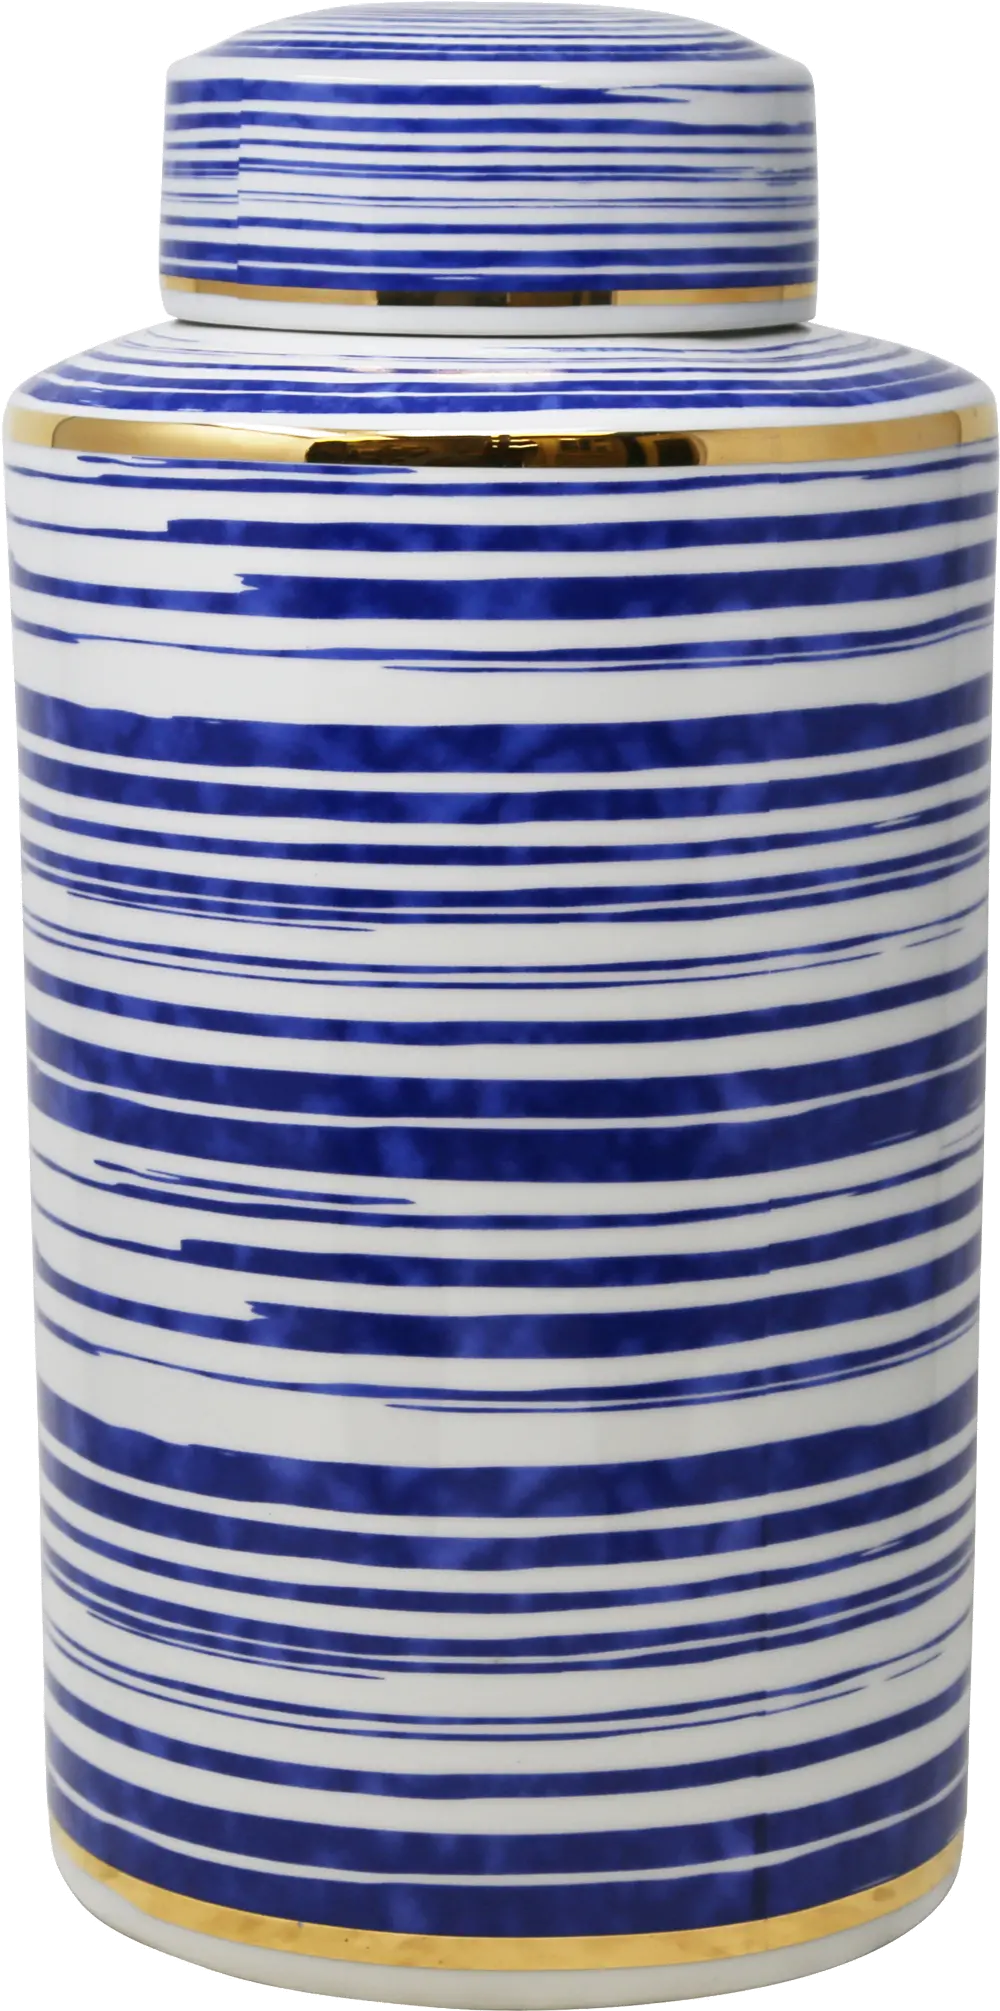 16 Inch White, Blue and Gold Striped Ceramic Lidded Jar-1